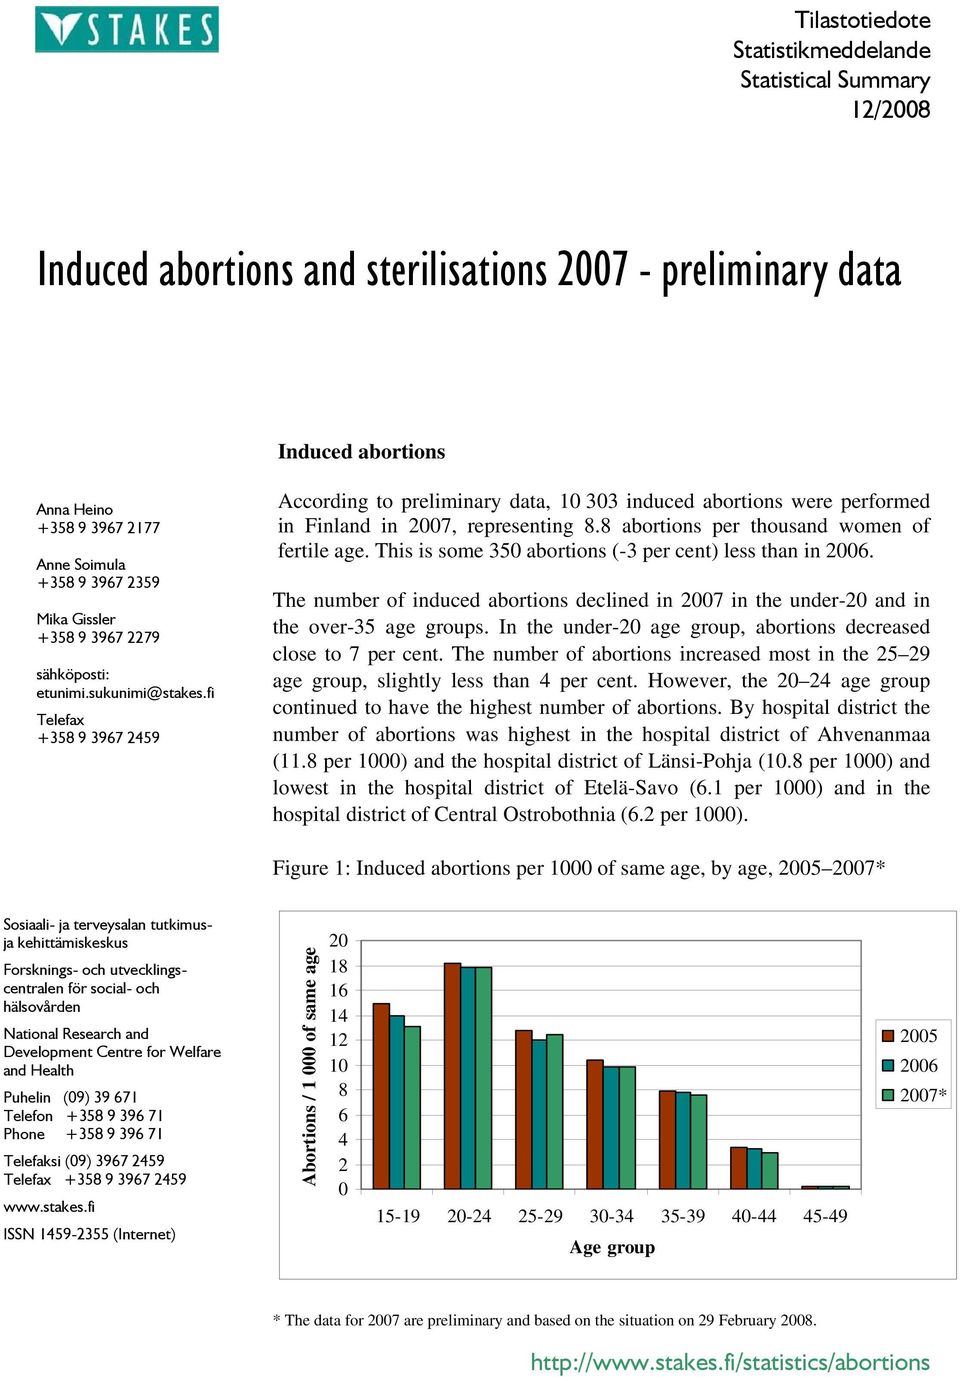 8 abortions per thousand women of fertile age. This is some 350 abortions (-3 per cent) less than in 2006.